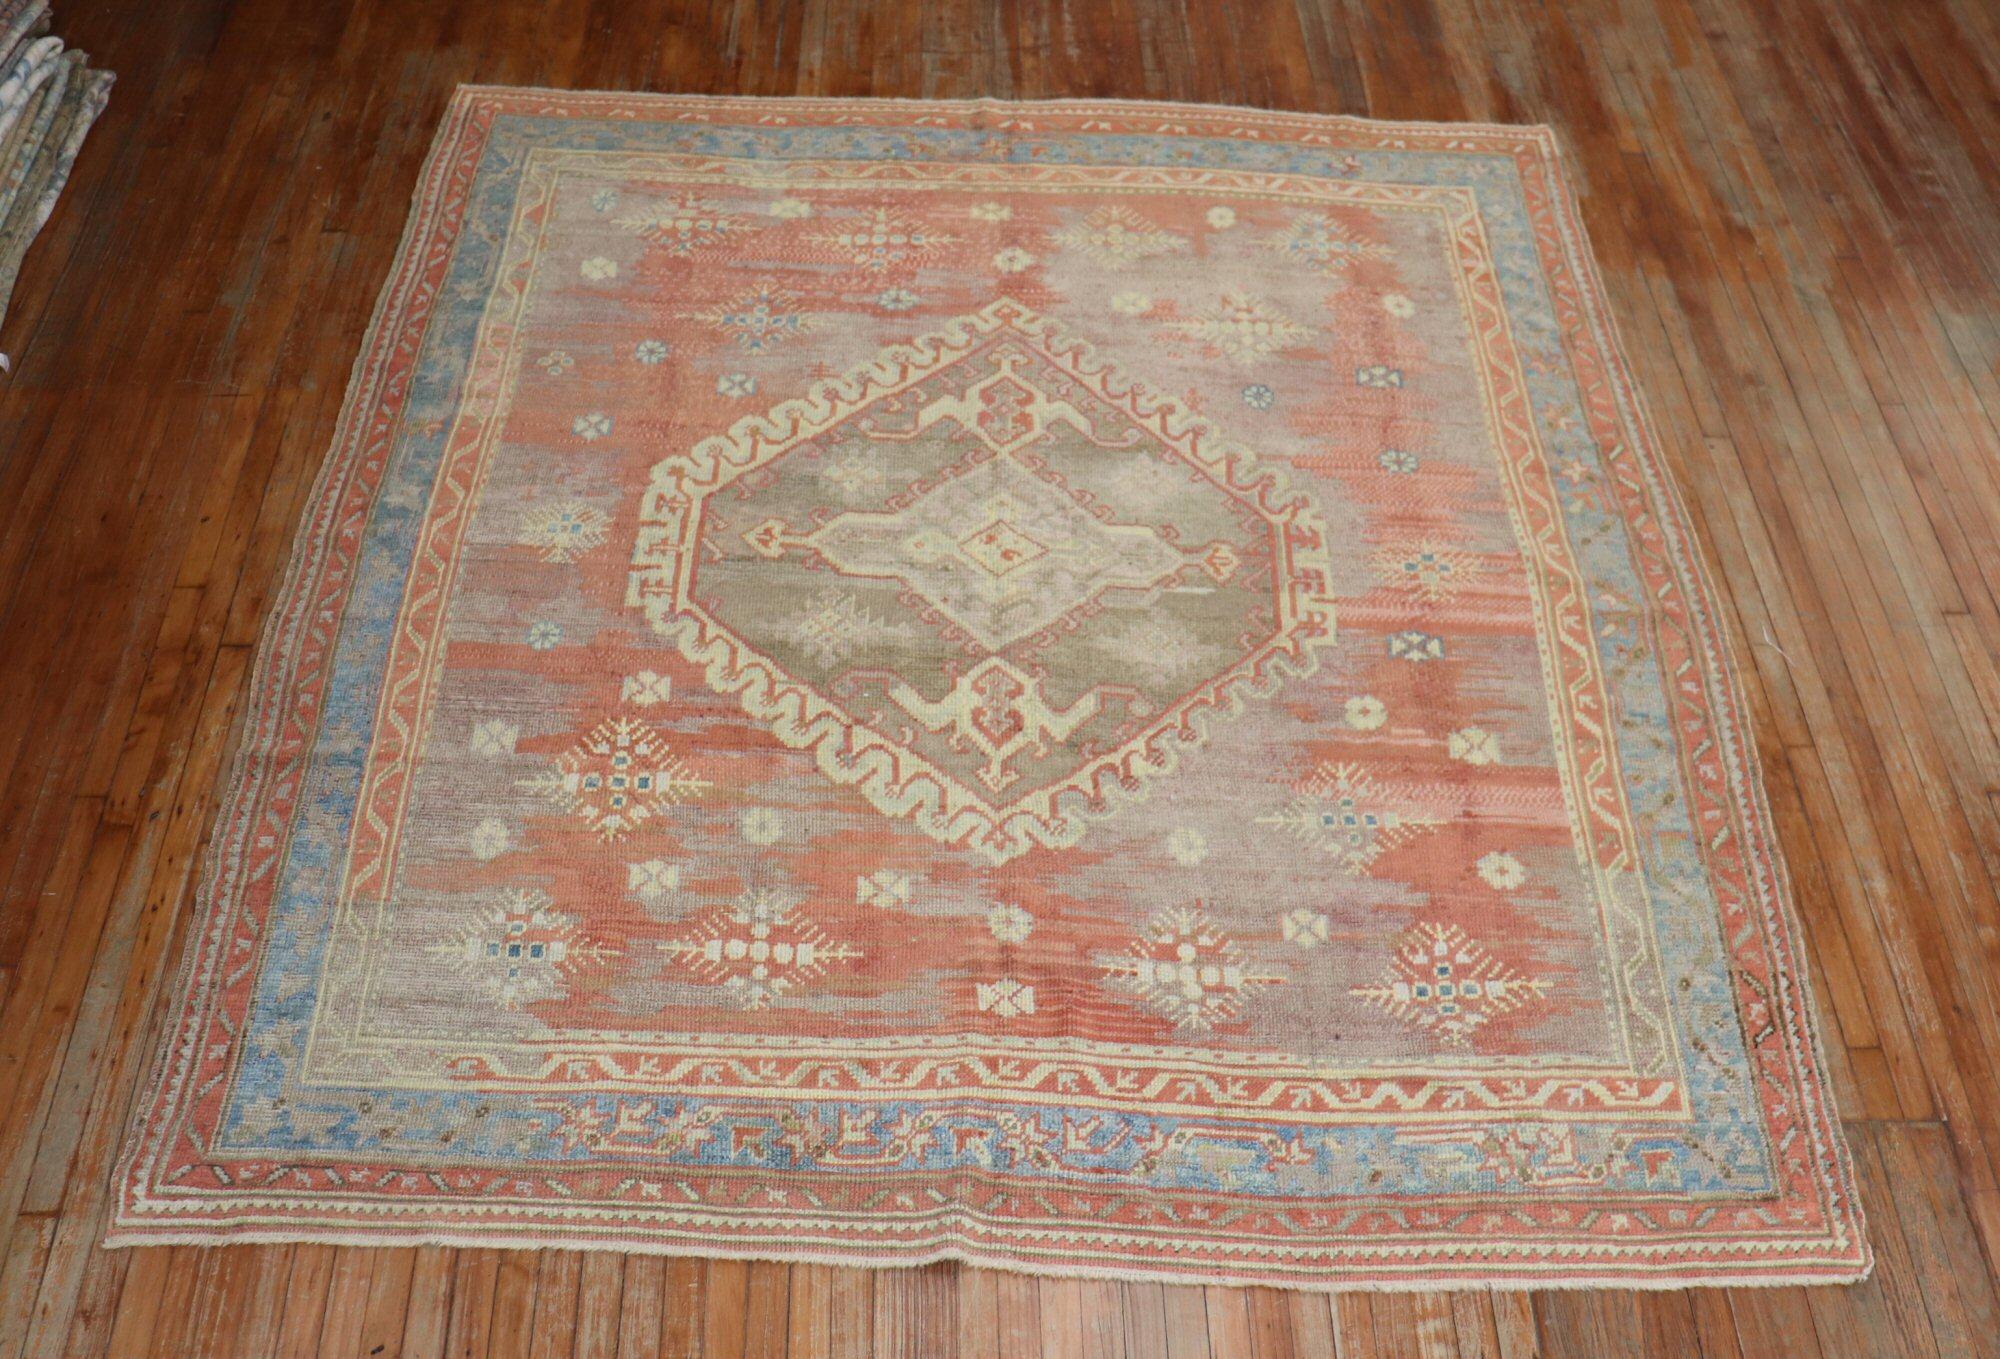 Square-shaped one-of-a-kind Turkish Oushak rug with a large scale medallion on a muted red ground and multi-band border. Accents colors in yellow, green, and blue. The Brown areas in the field are not worn areas, they are different colored undyed